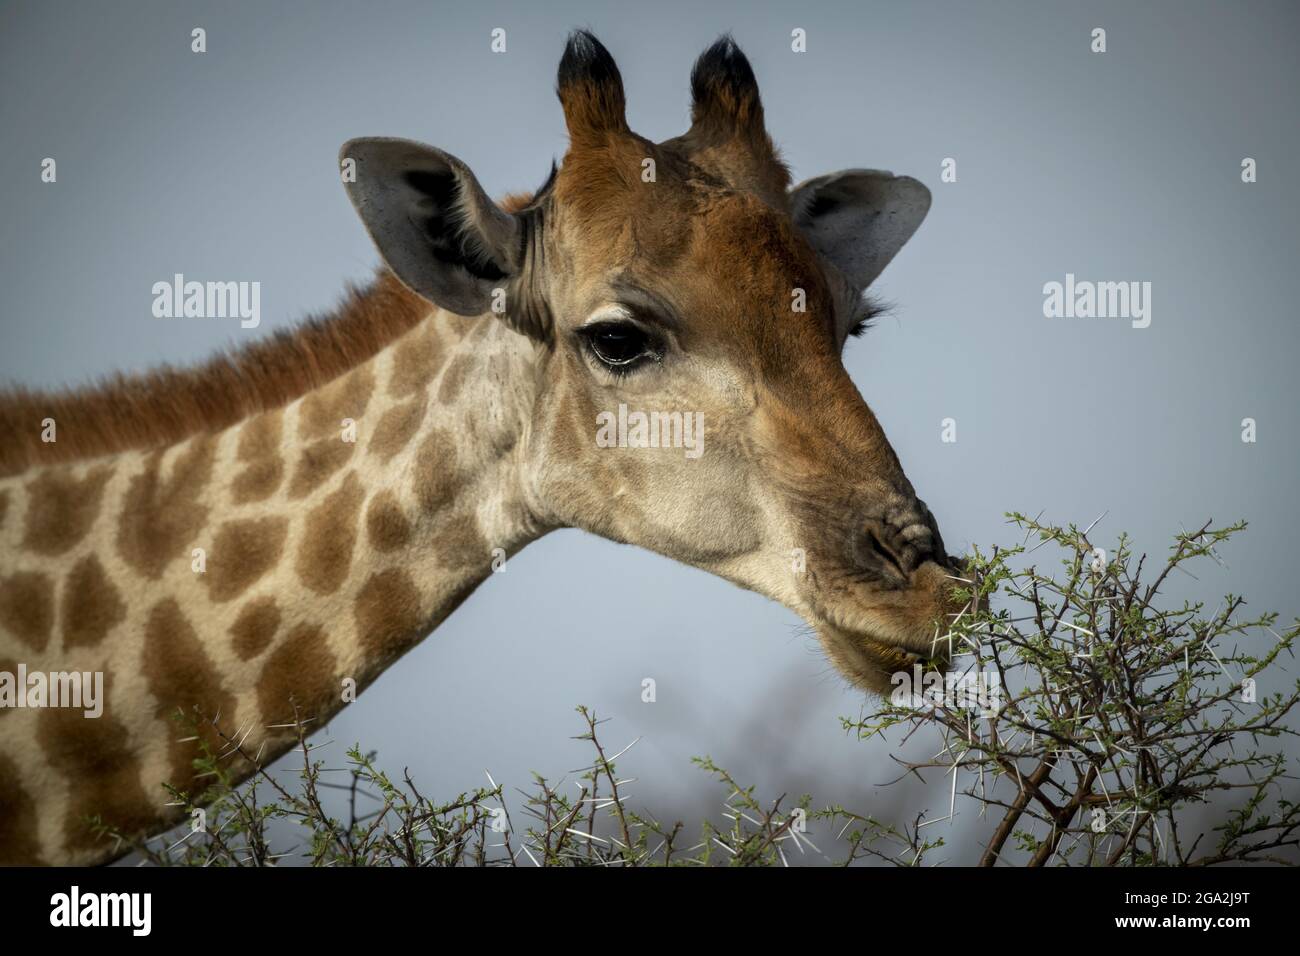 Close-up of a southern giraffe (Giraffa camelopardalis angolensis) browsing leafy thornbush on the savanna against a blue sky and eyeing the camera... Stock Photo